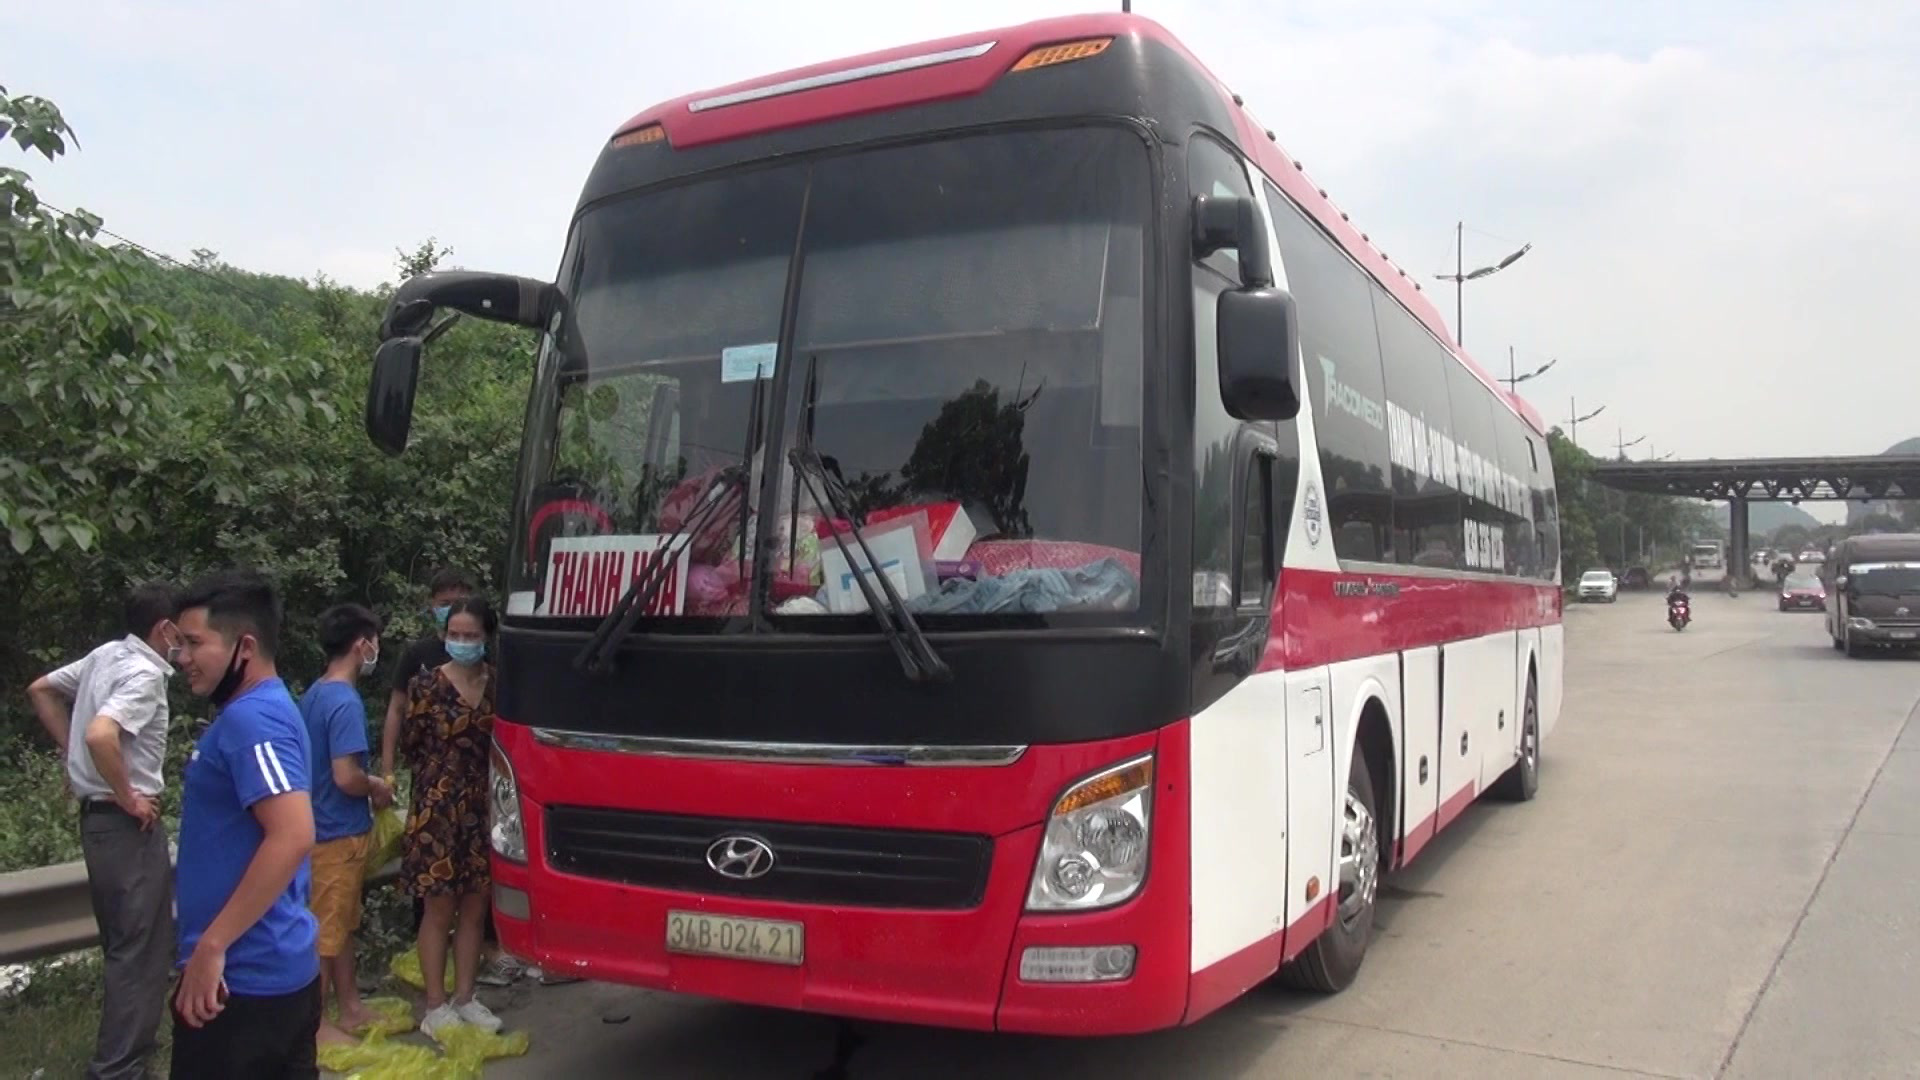 Long-haul bus operator fined for carrying passengers nearly double capacity in Vietnam